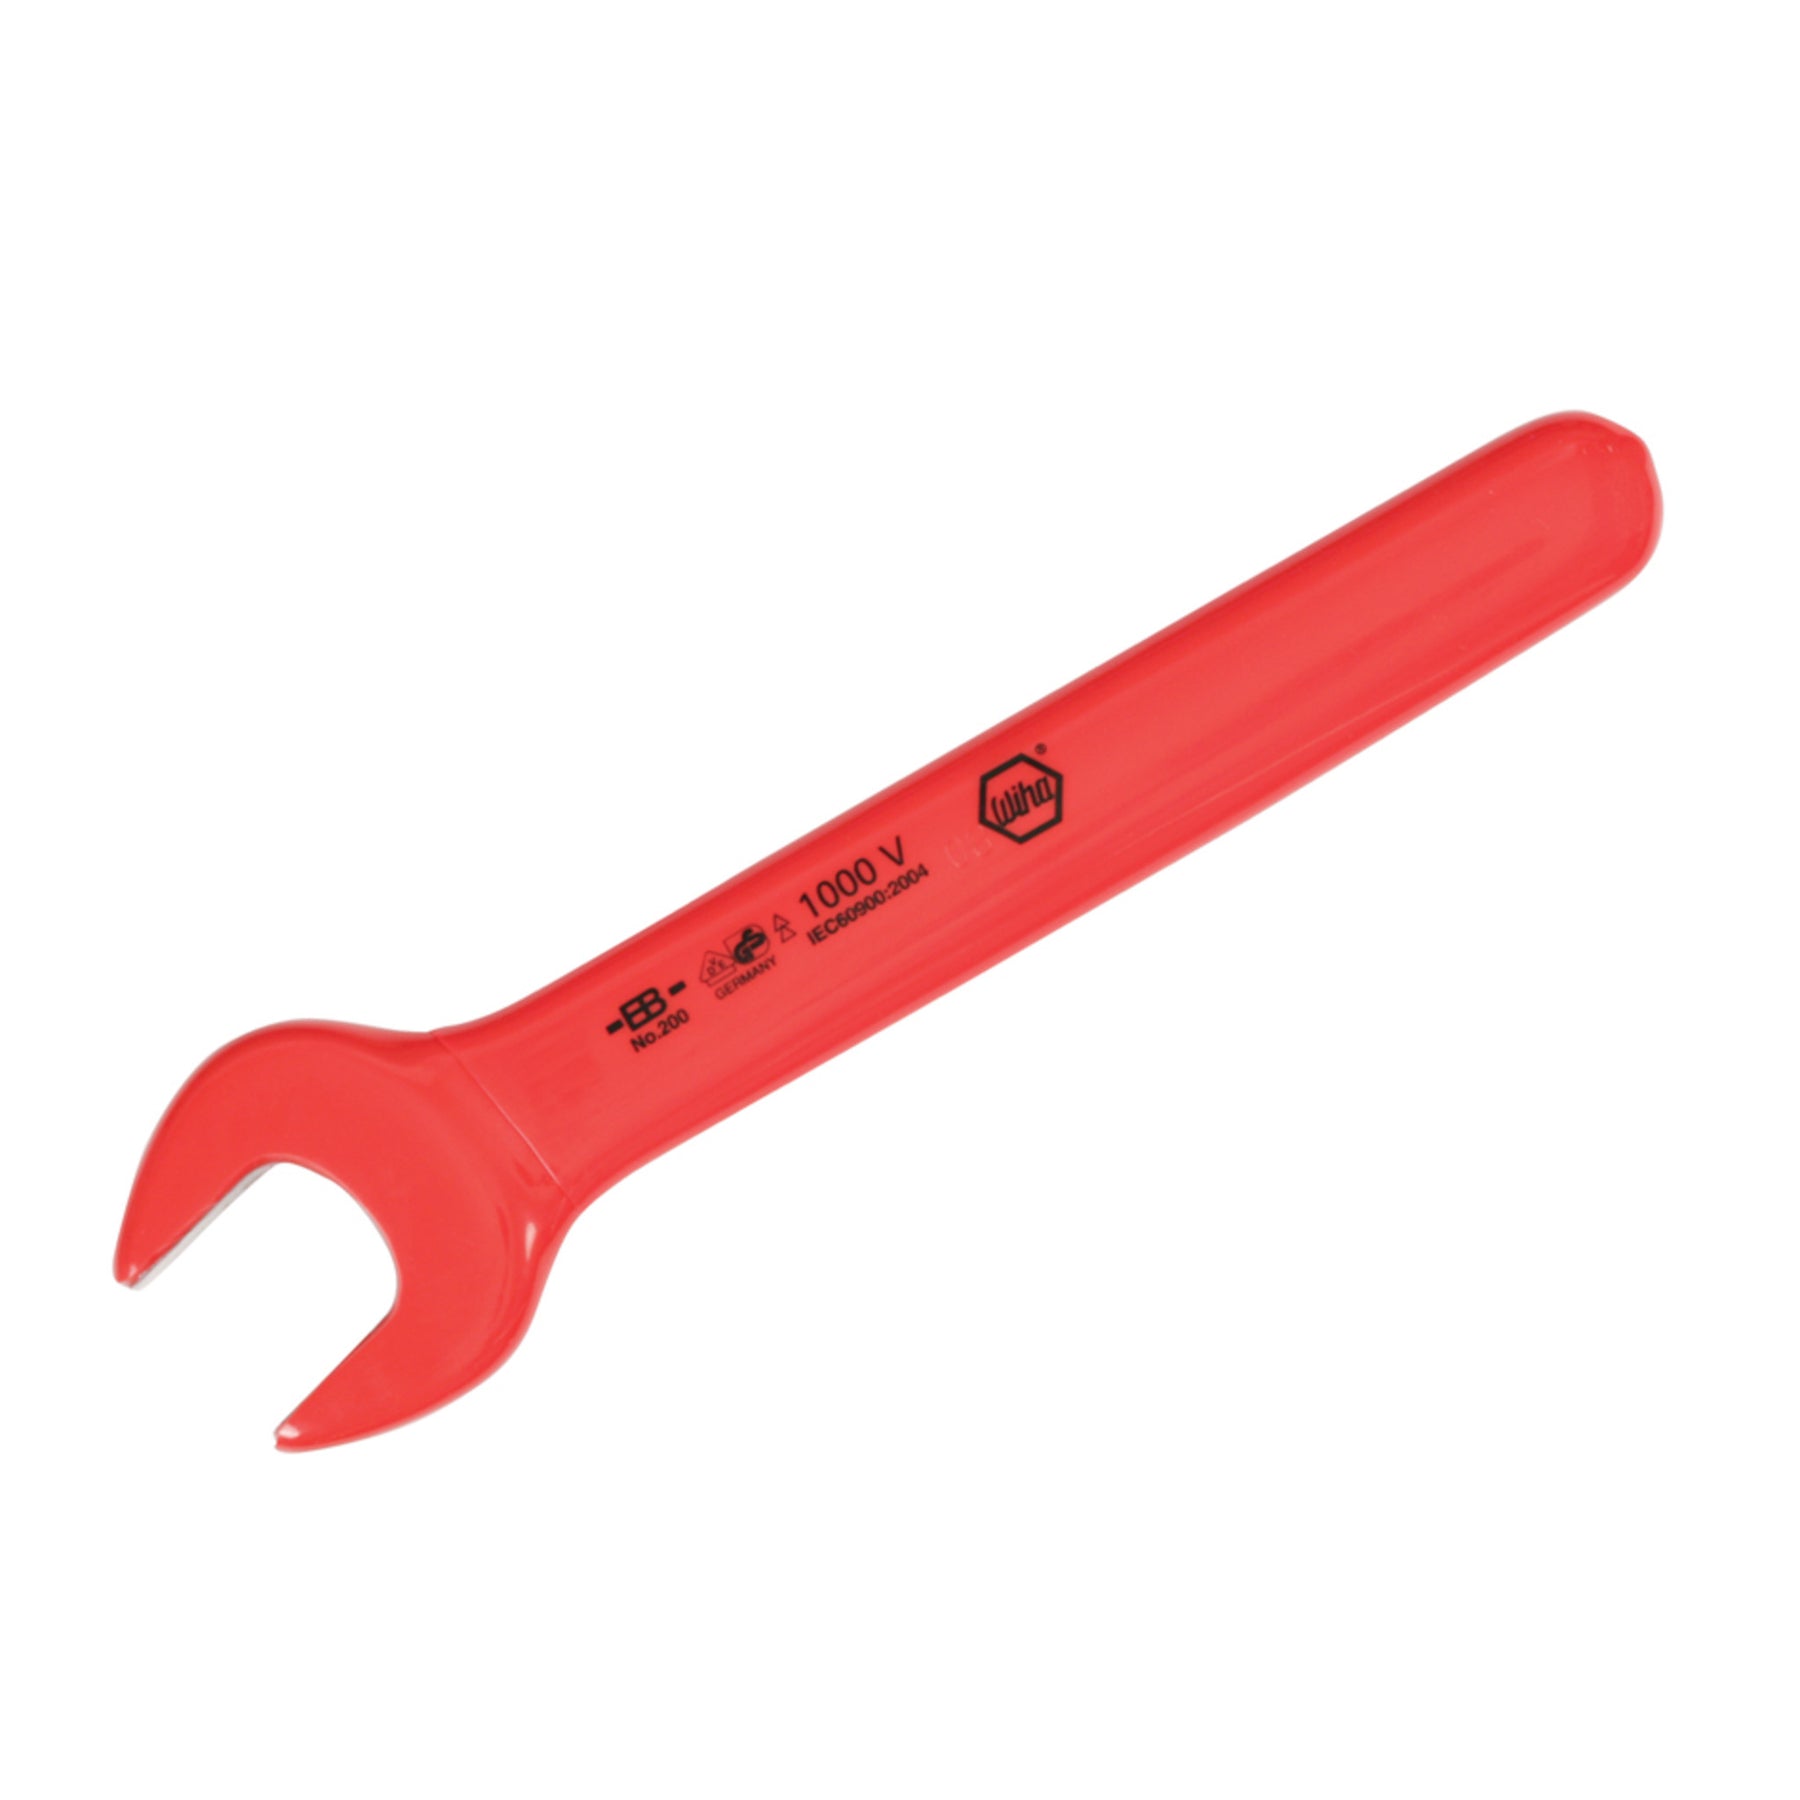 Wiha 20007 Insulated Open End Wrench 7.0mm